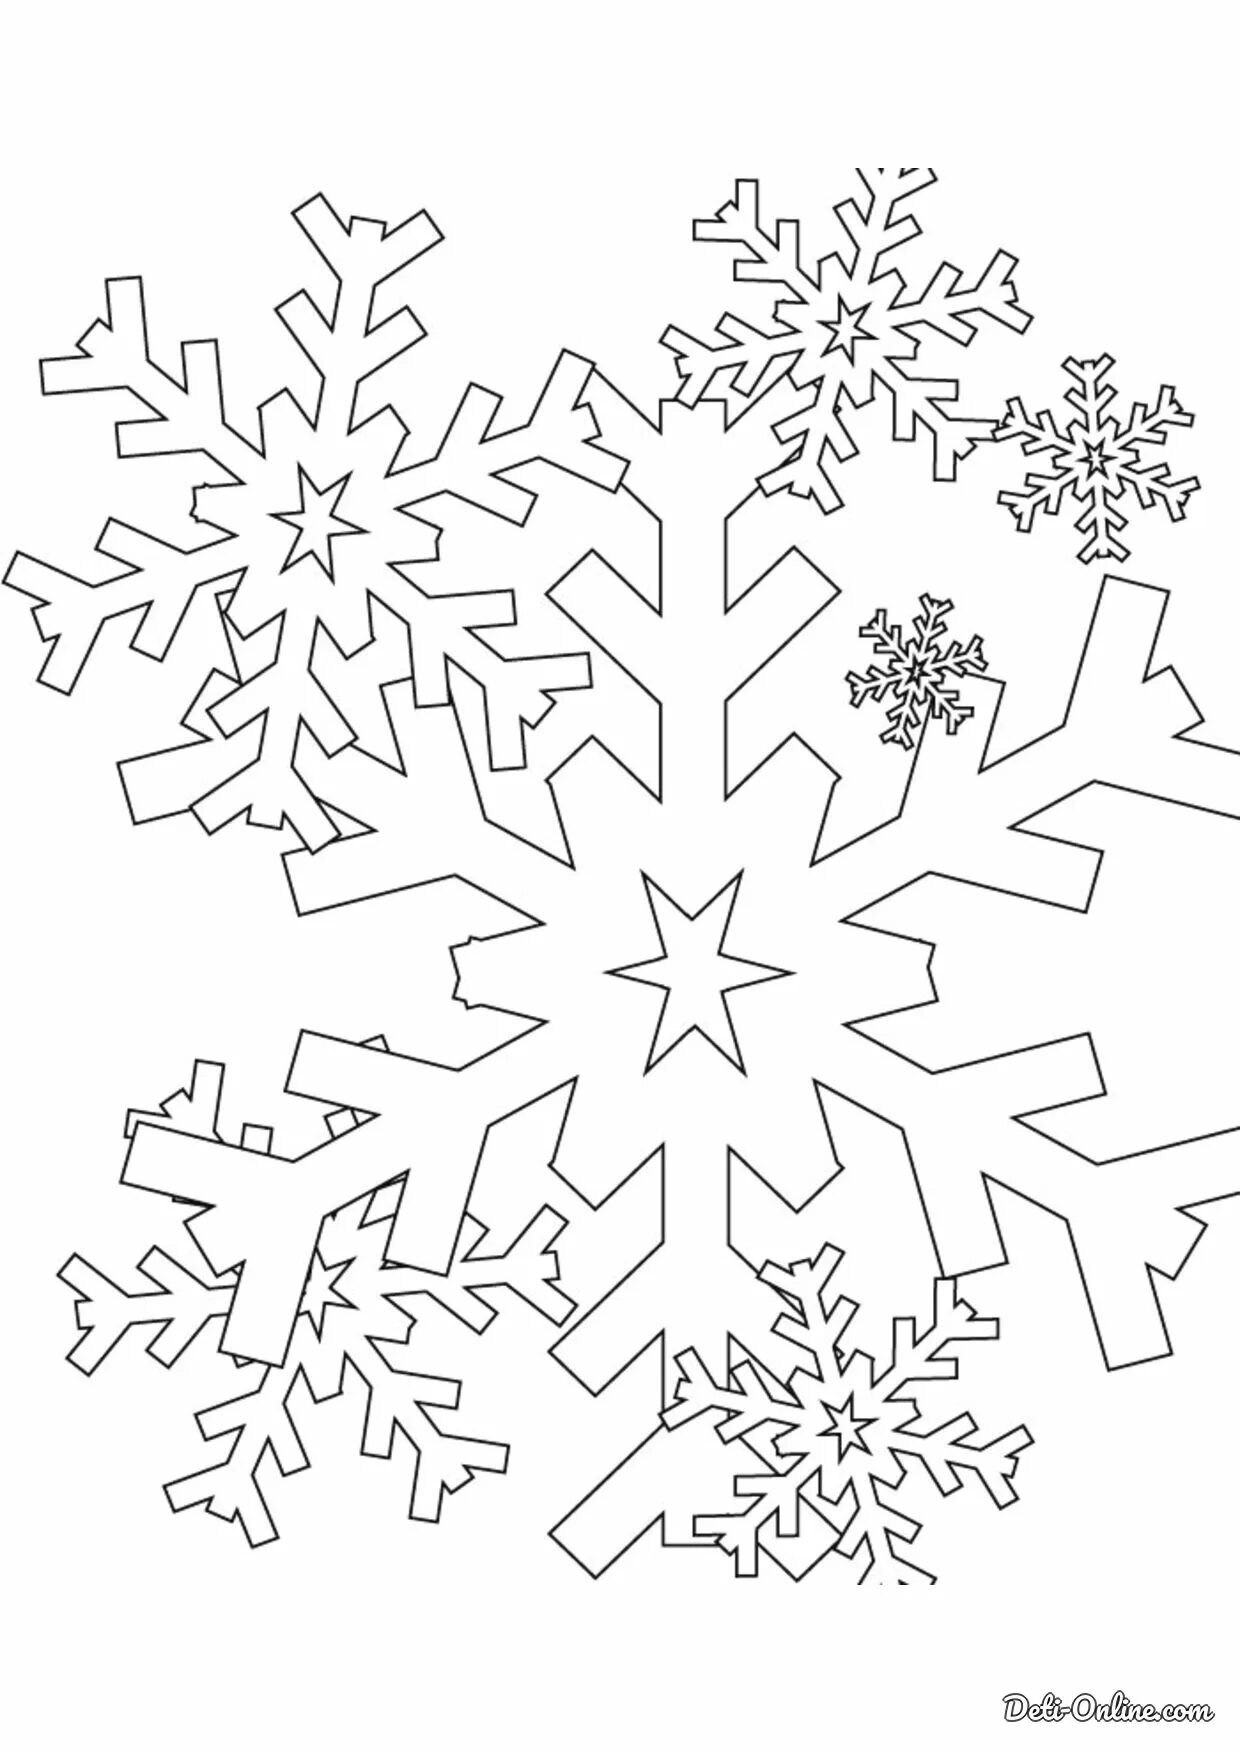 Winter patterns for kids #11